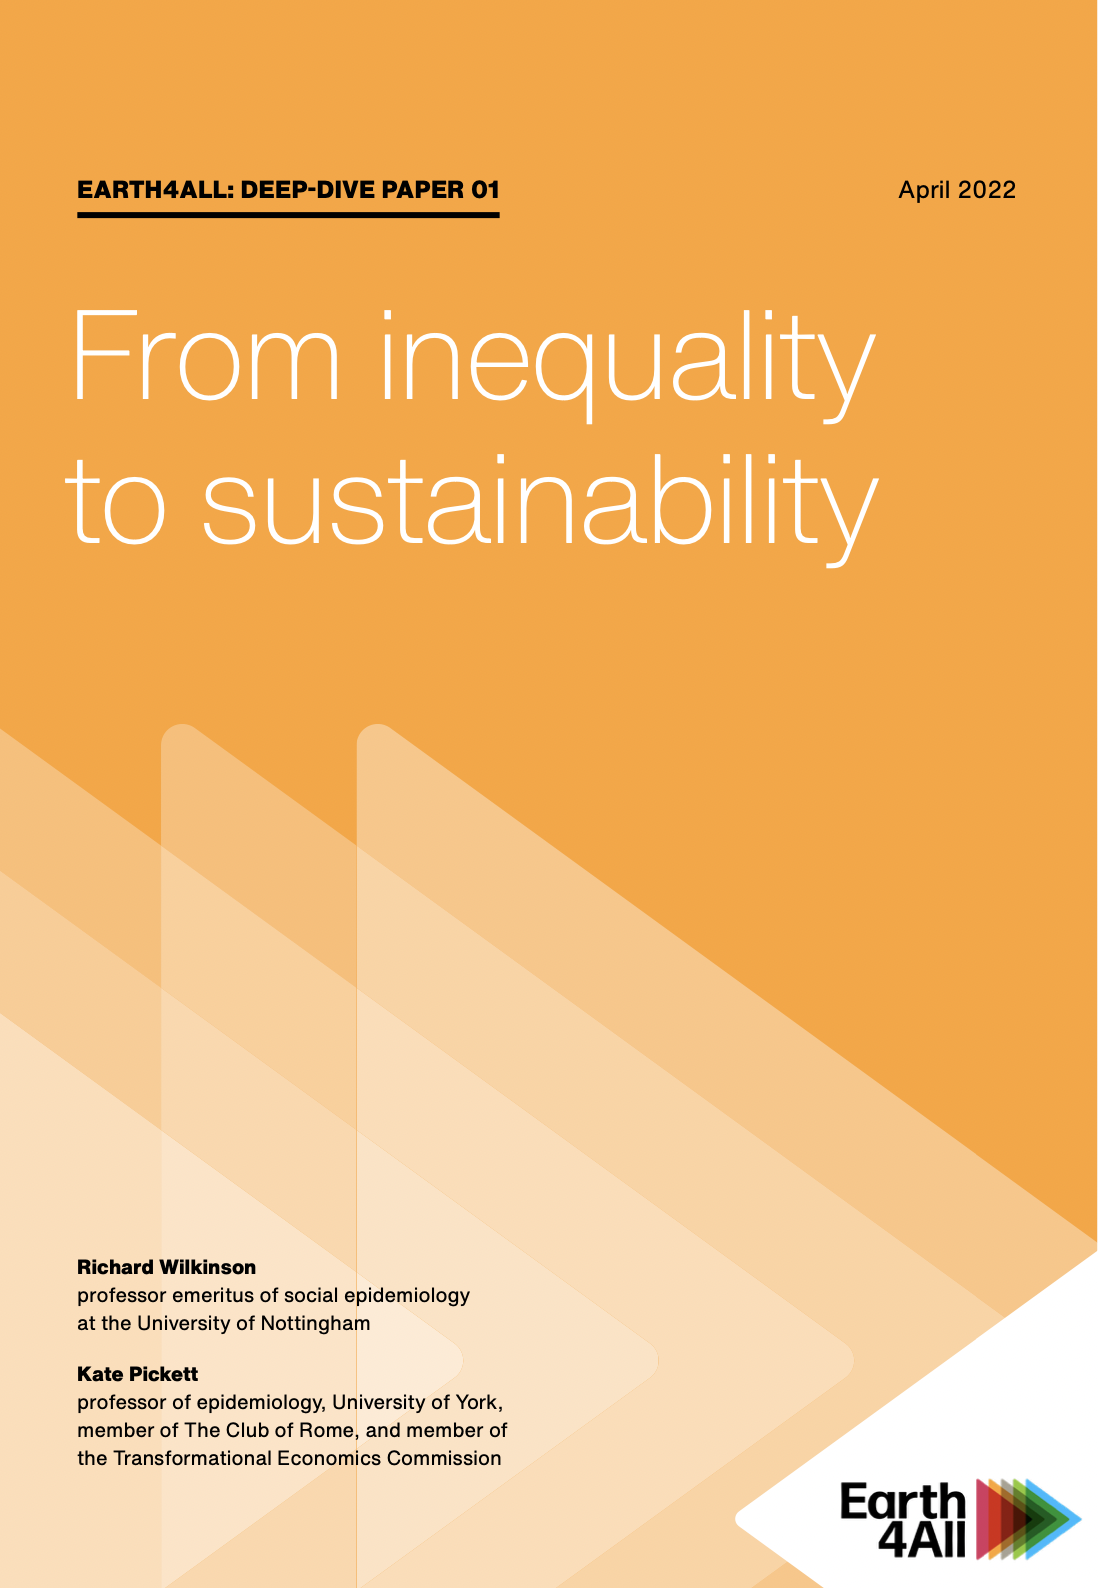 From inequality to sustainability